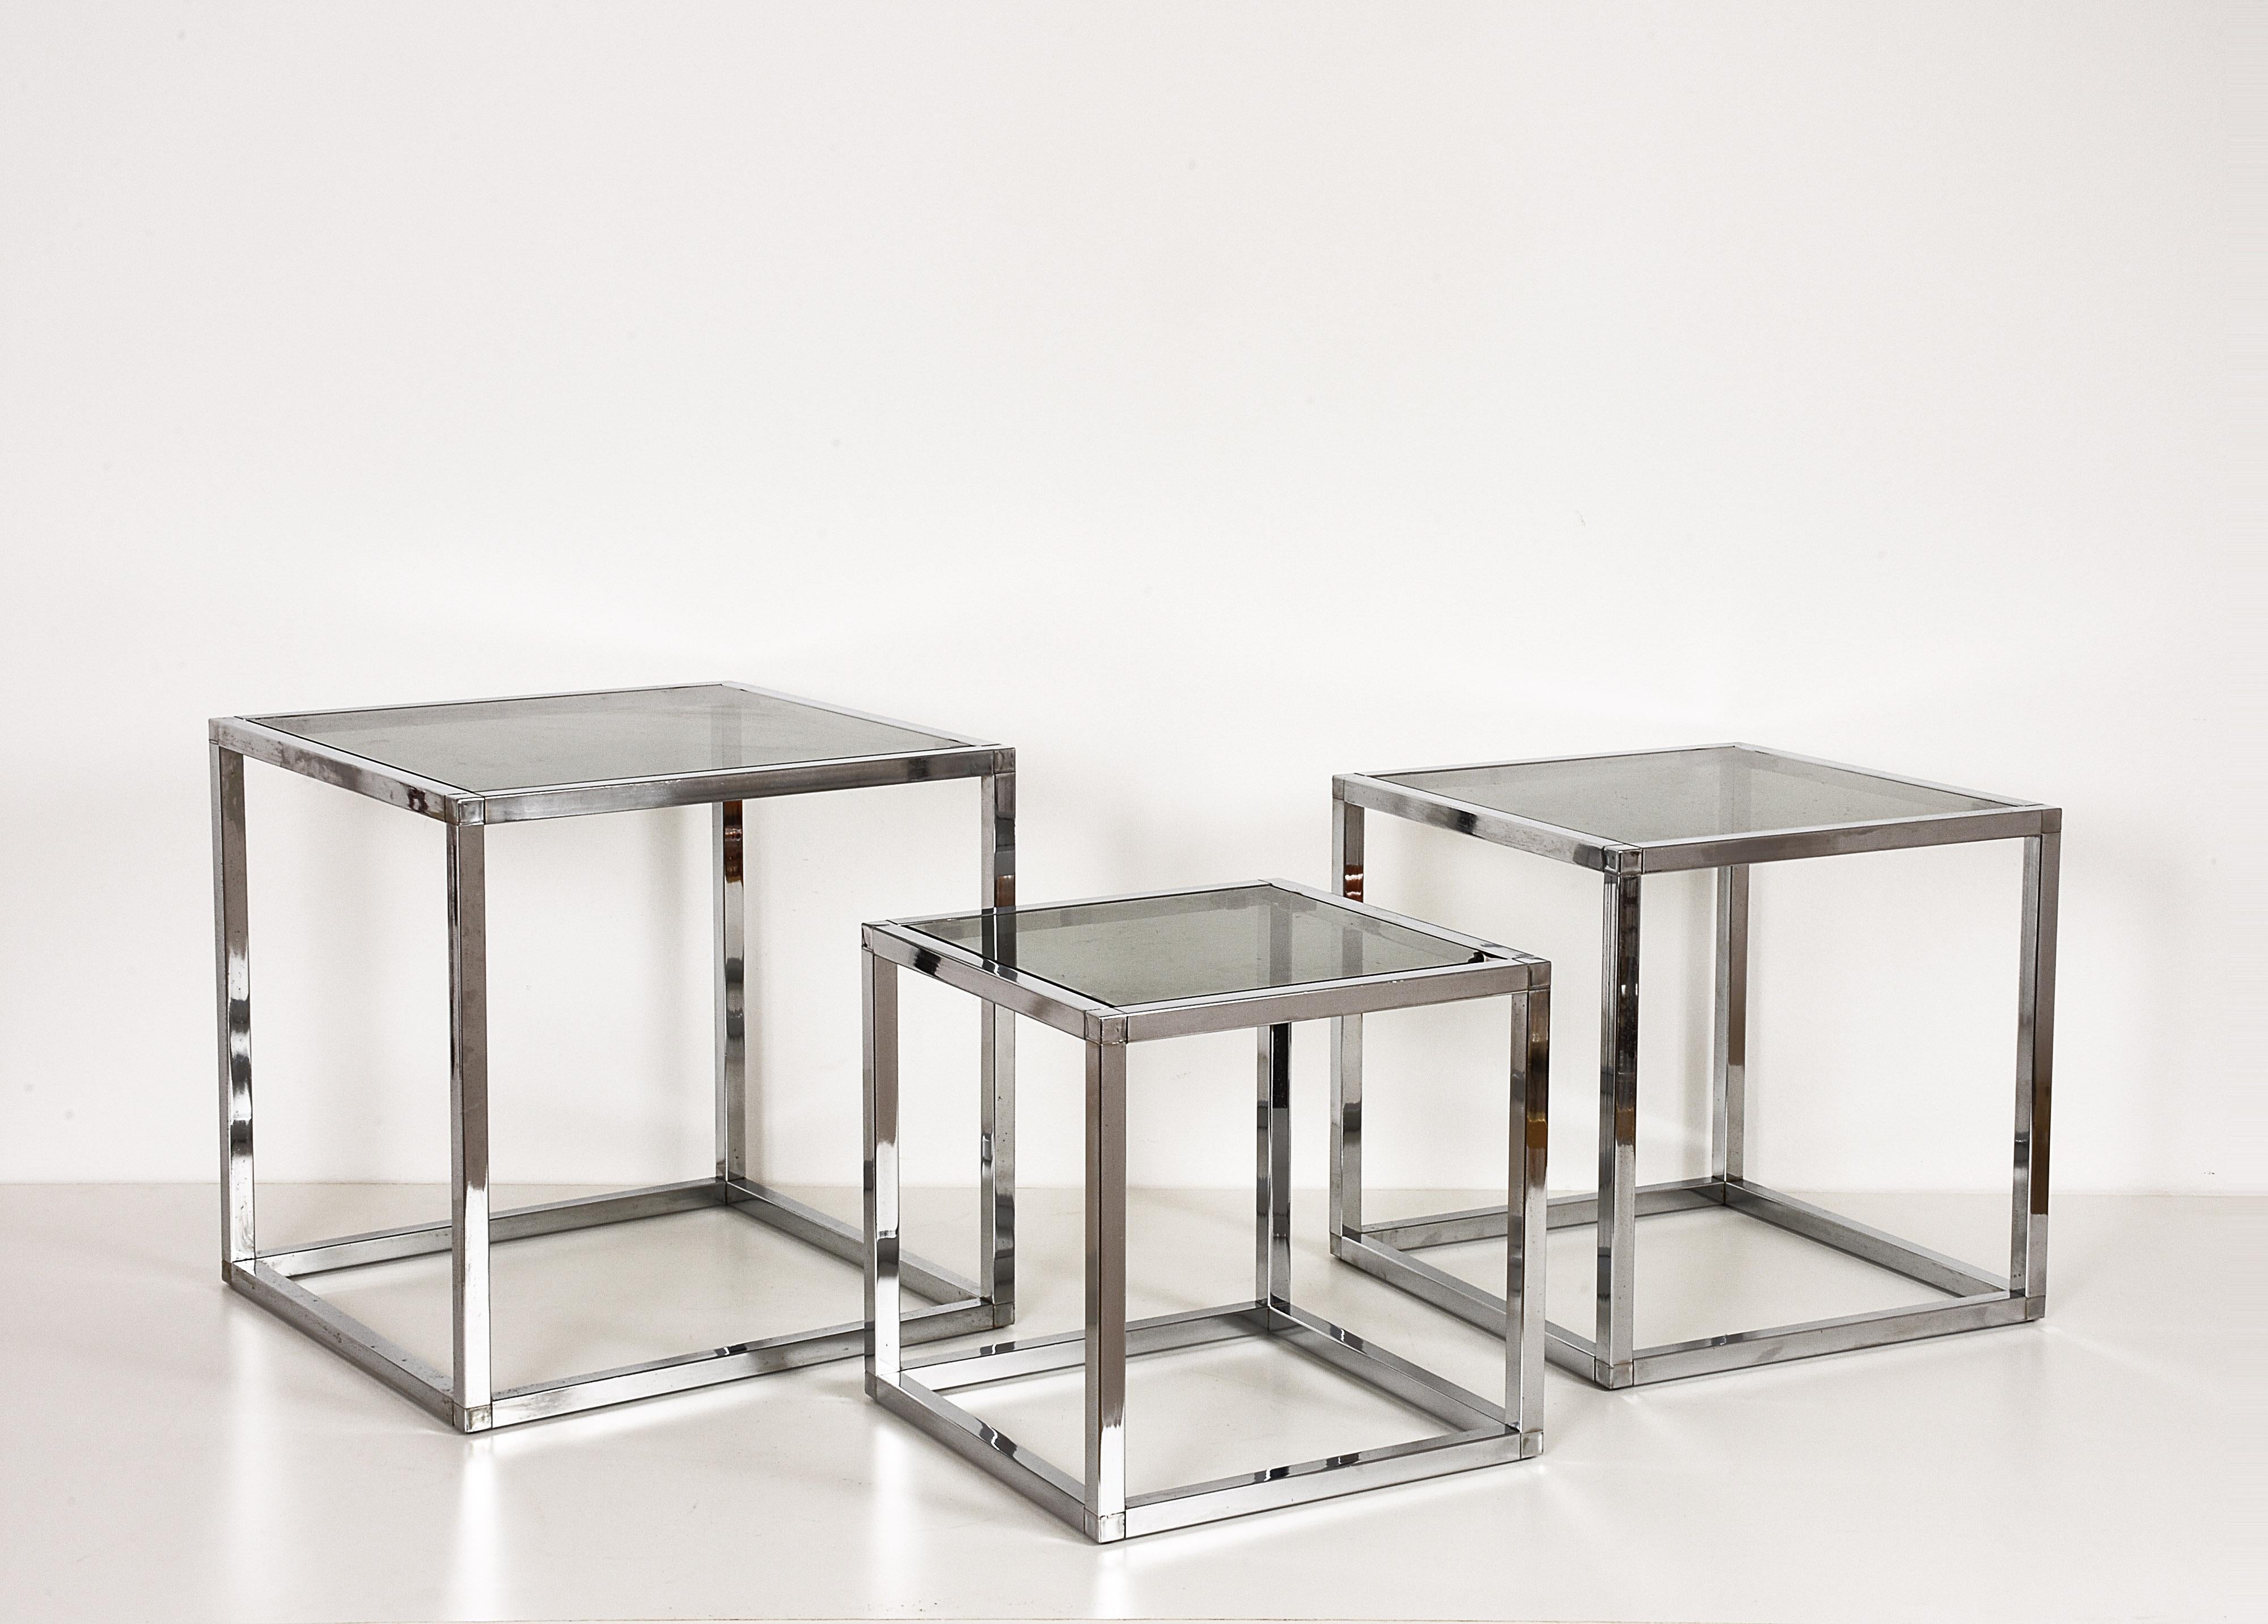 Late 20th Century Set of Three Nesting Tables in Chrome and Glass, Italy, 1970s Mid-Century Modern